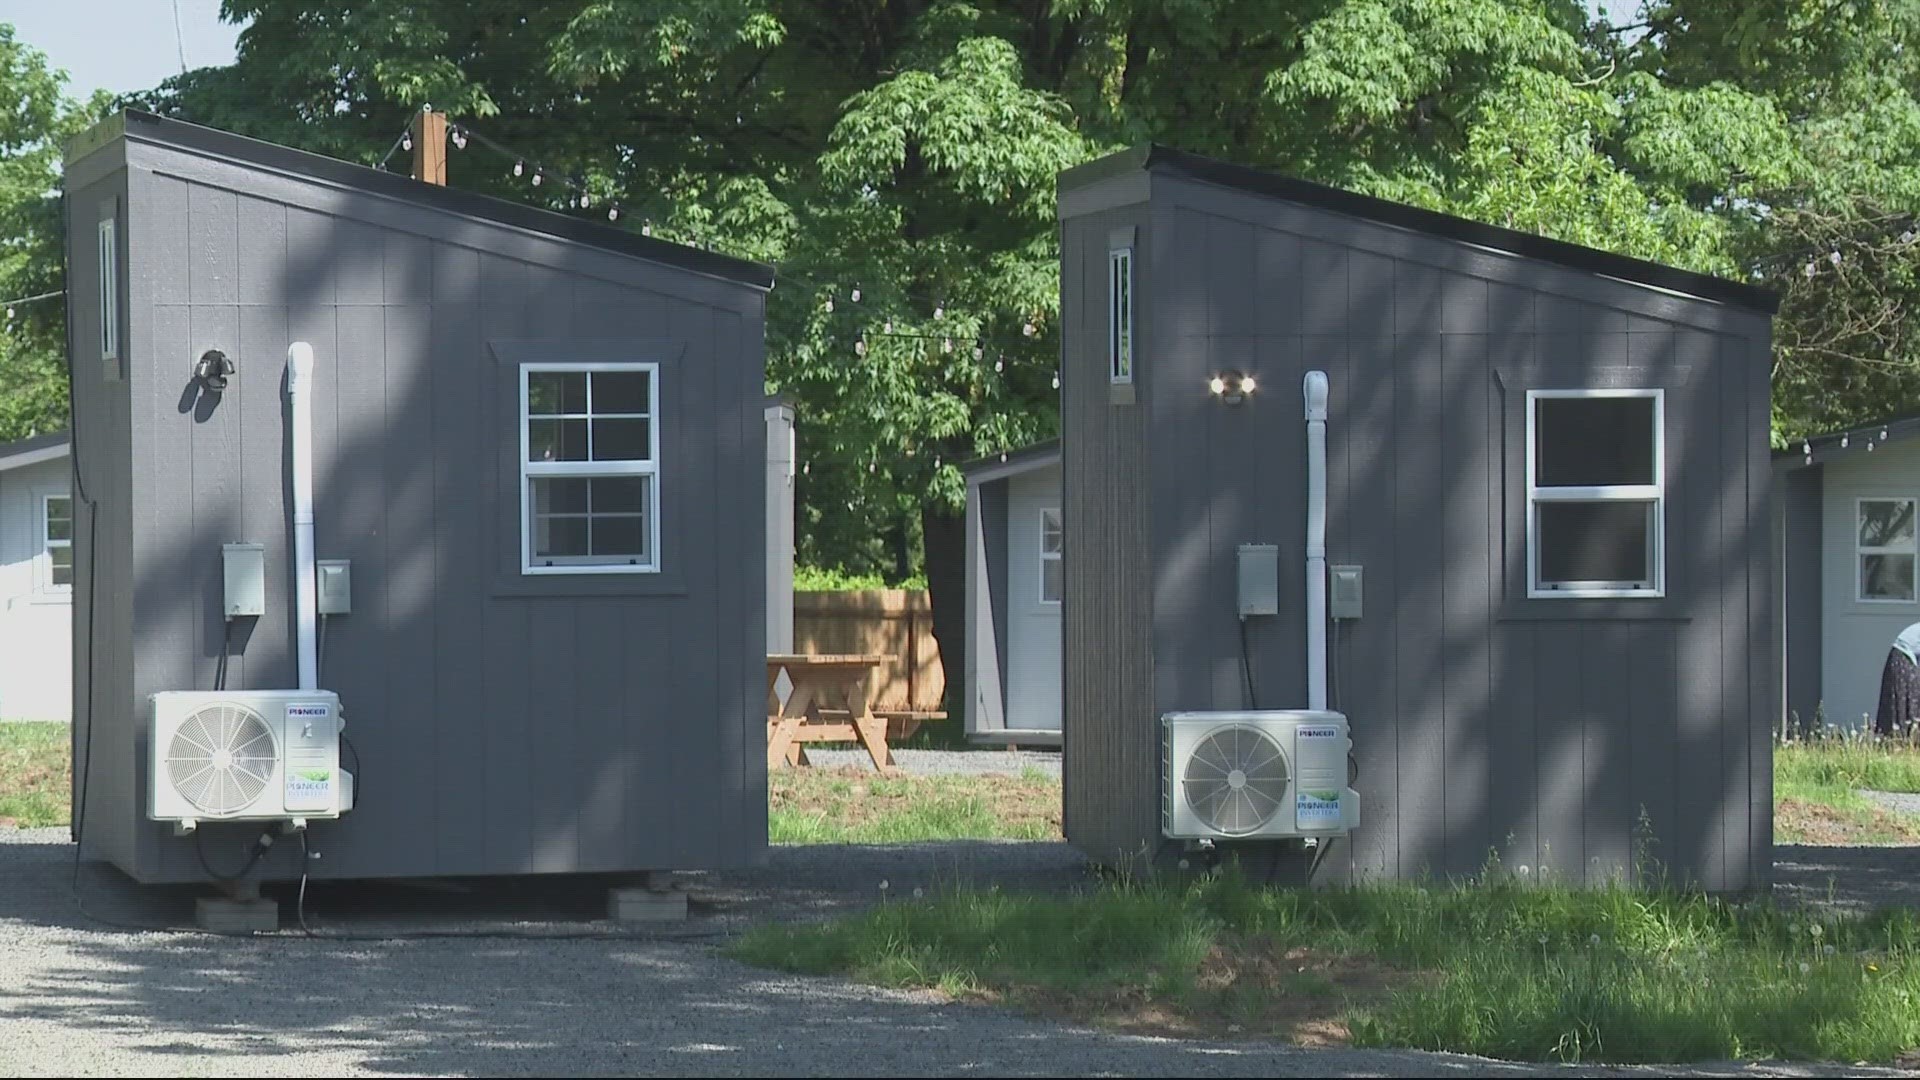 The first of these outdoor pod shelters opened two years ago. Over the last year, about 70 people have moved on to other housing.